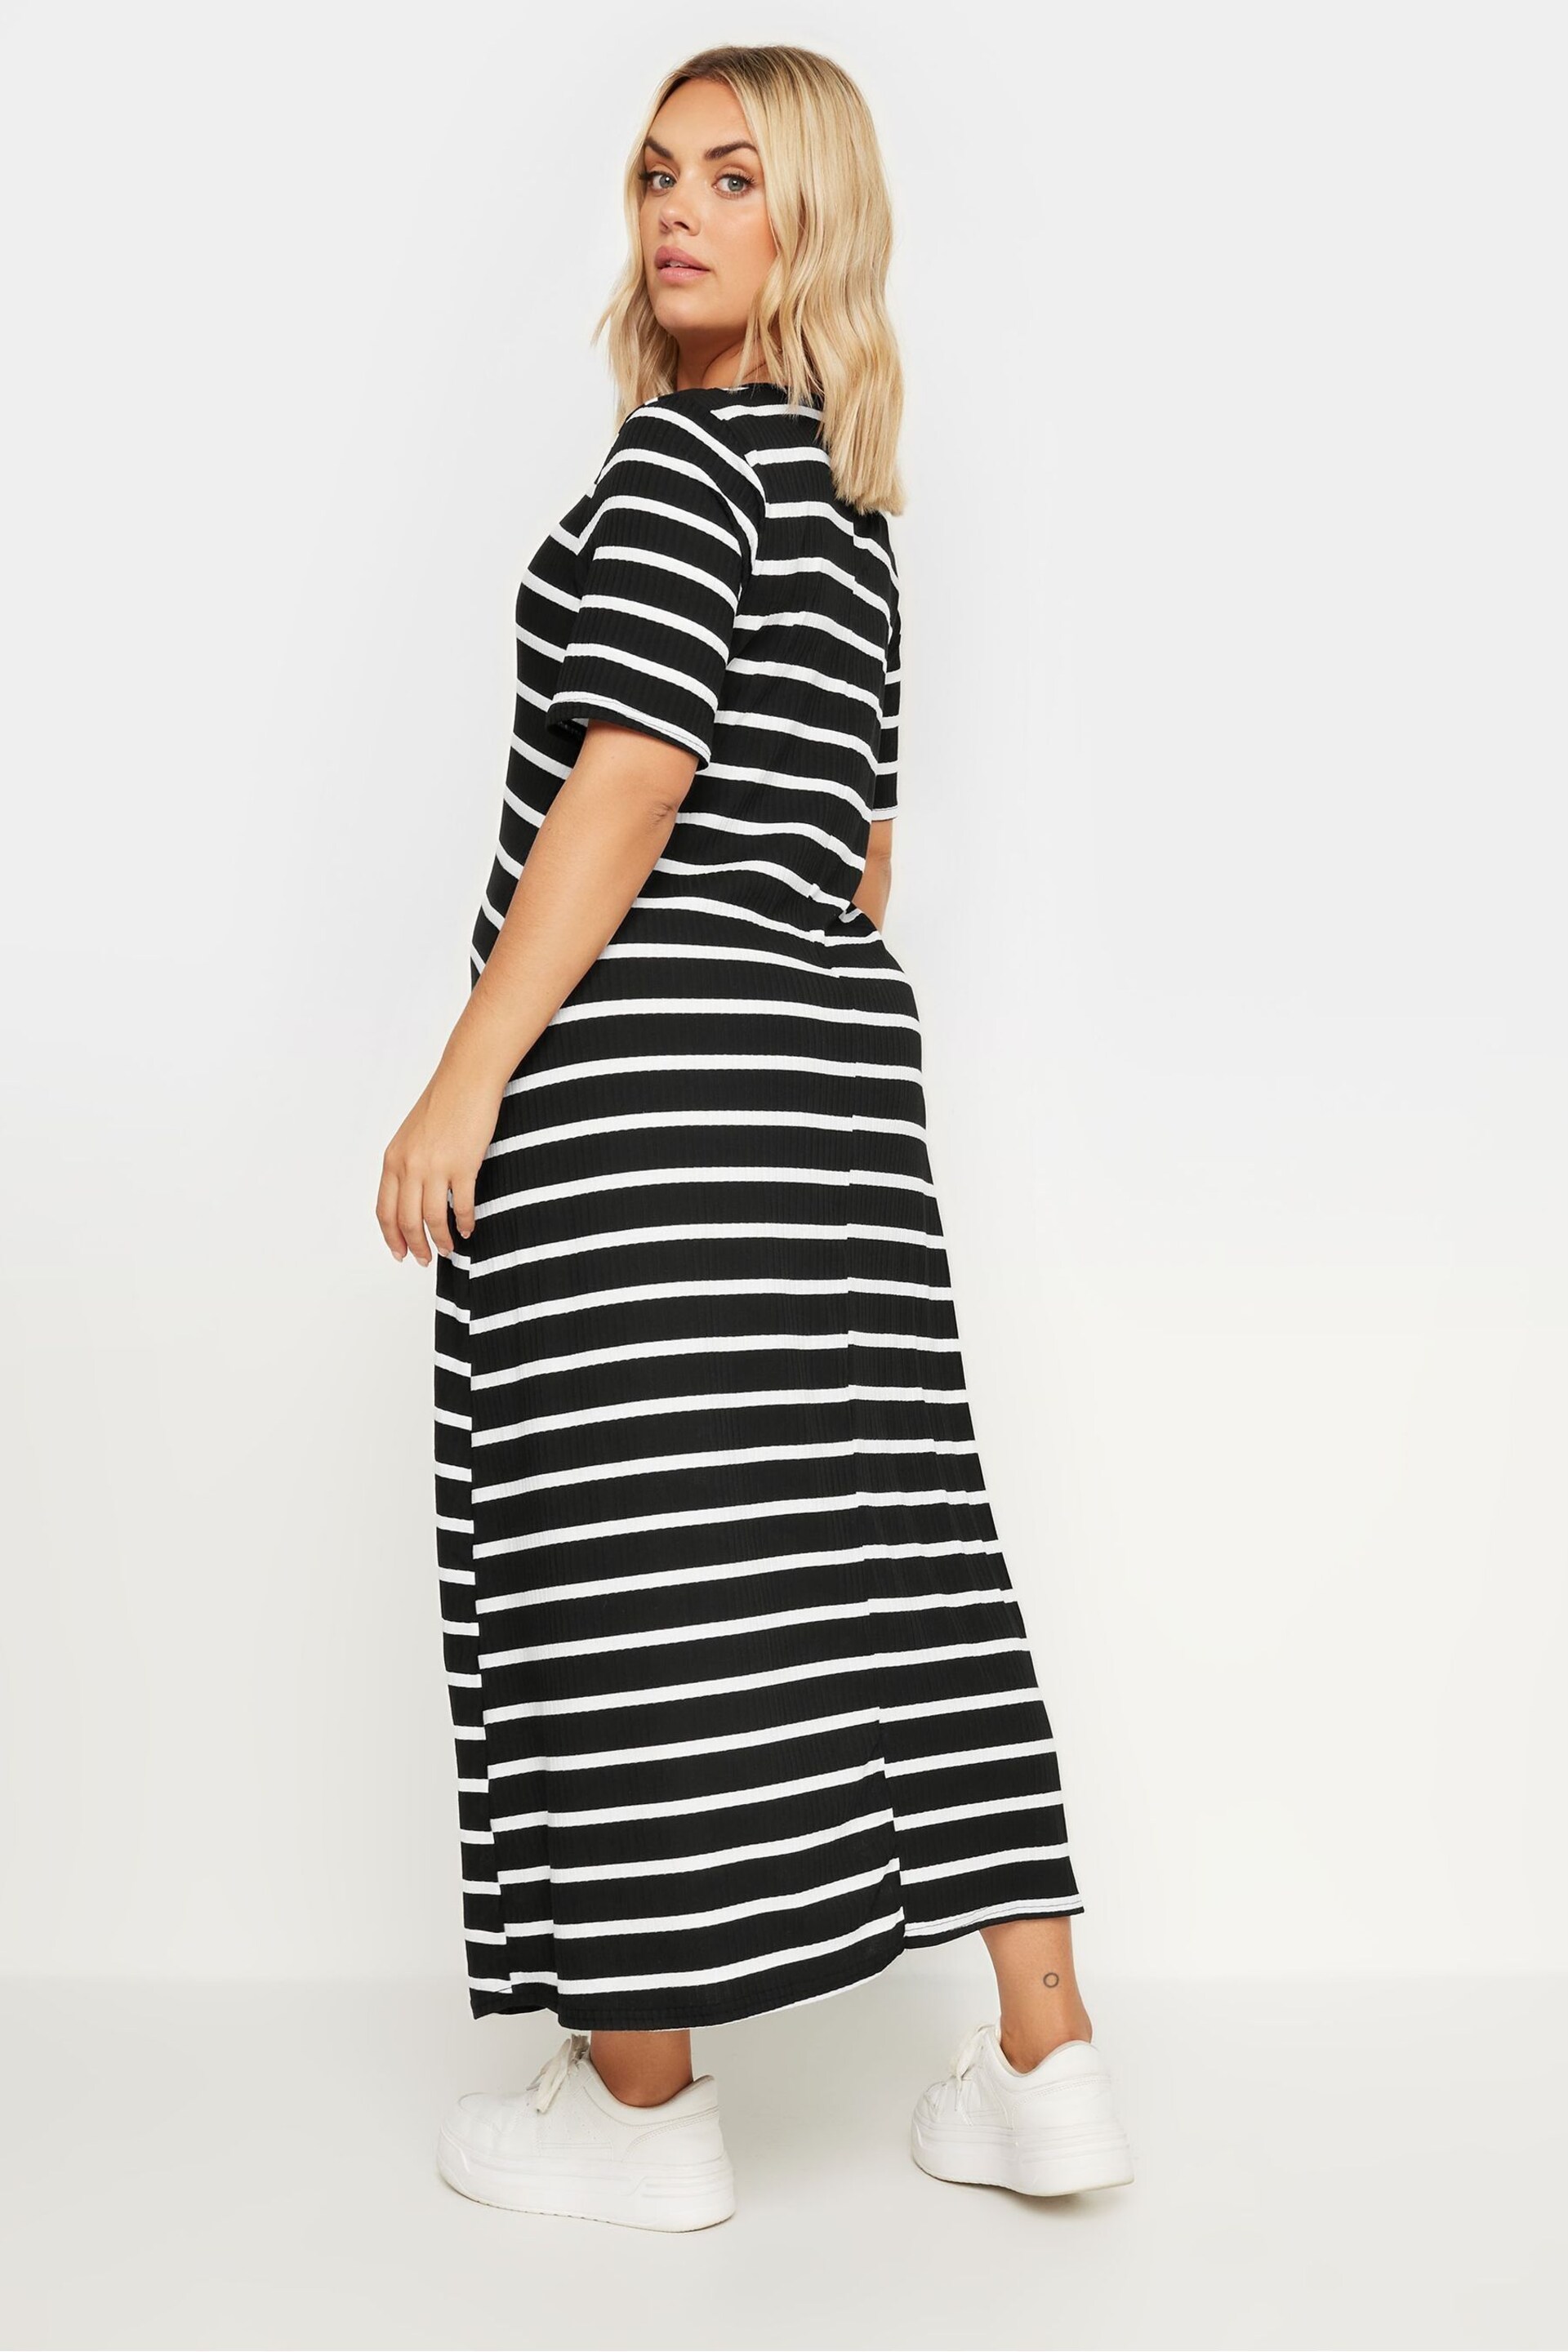 Yours Curve Black Stripe Ribbed Maxi Dress - Image 3 of 5